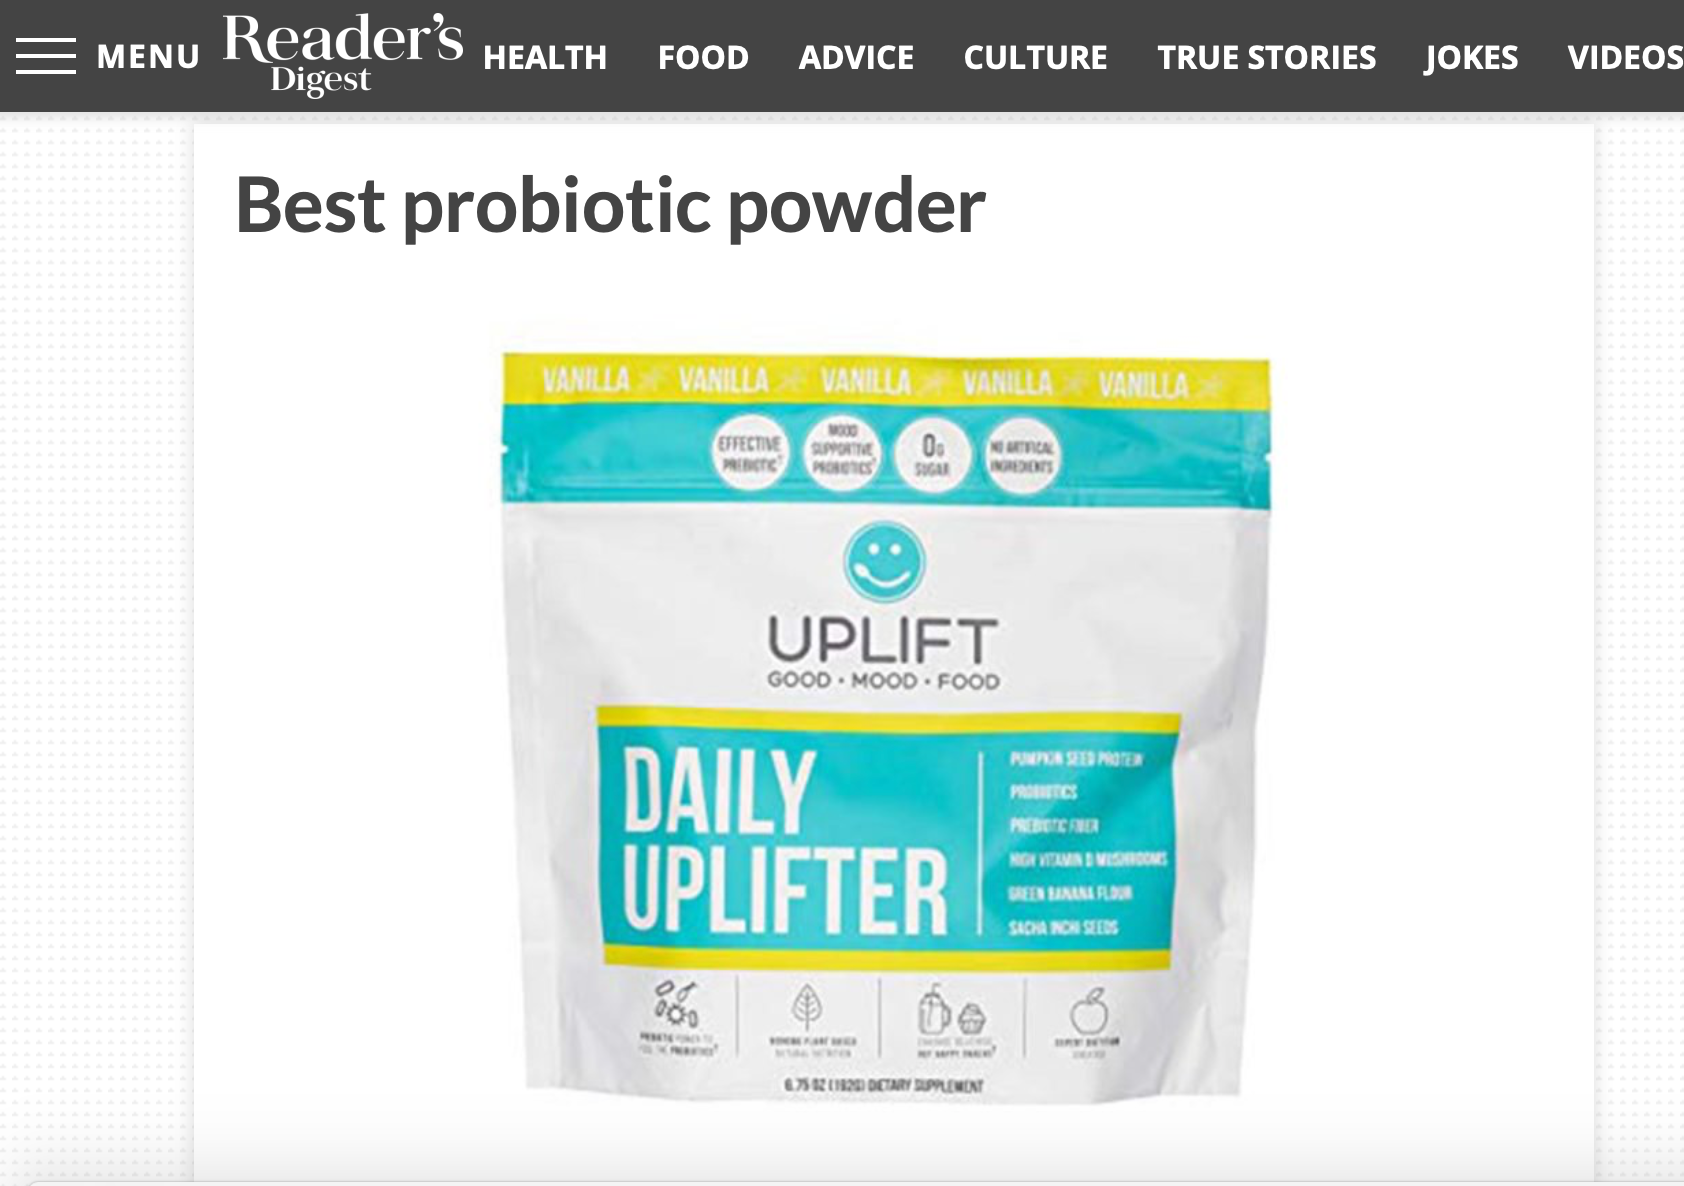 uplift food daily uplifter best probiotic powder to buy on amazon readers digest